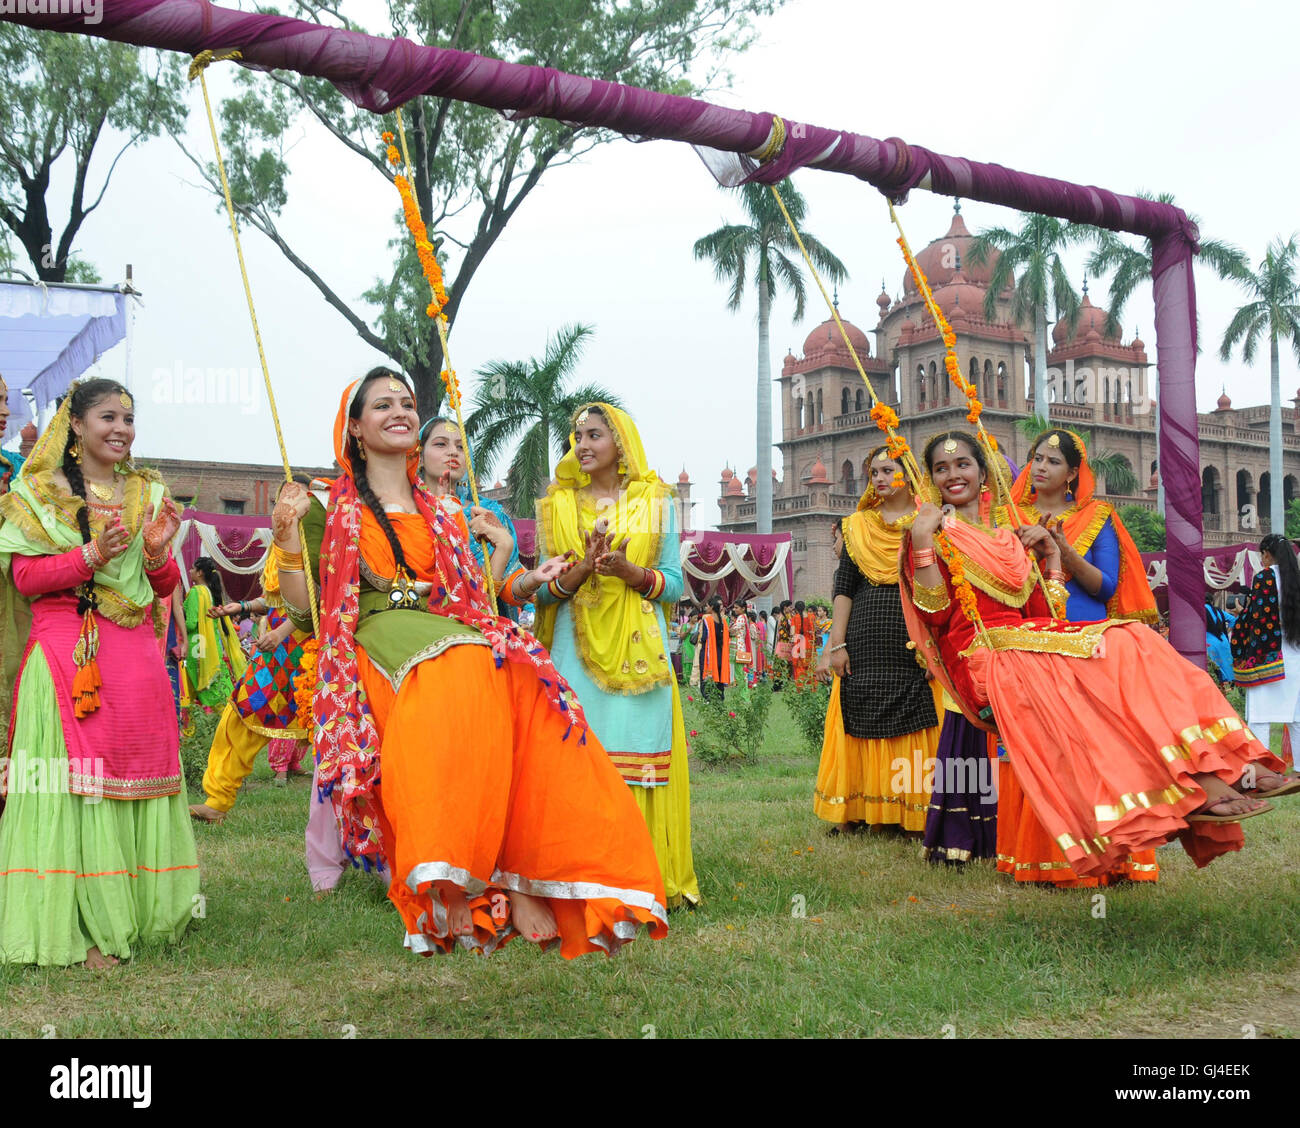 (160813) -- AMRITSAR (INDIA), Aug. 13, 2016 (Xinhua) -- College girls wearing traditional Punjabi dresses swing during the celebration of Teej Festival in Amritsar, India, Aug. 13, 2016. Teej is a generic name for a number of festivals celebrated among females to welcome monsoon season in northern and western India and Nepal. (xinhua/stringer) (wtc) Stock Photo